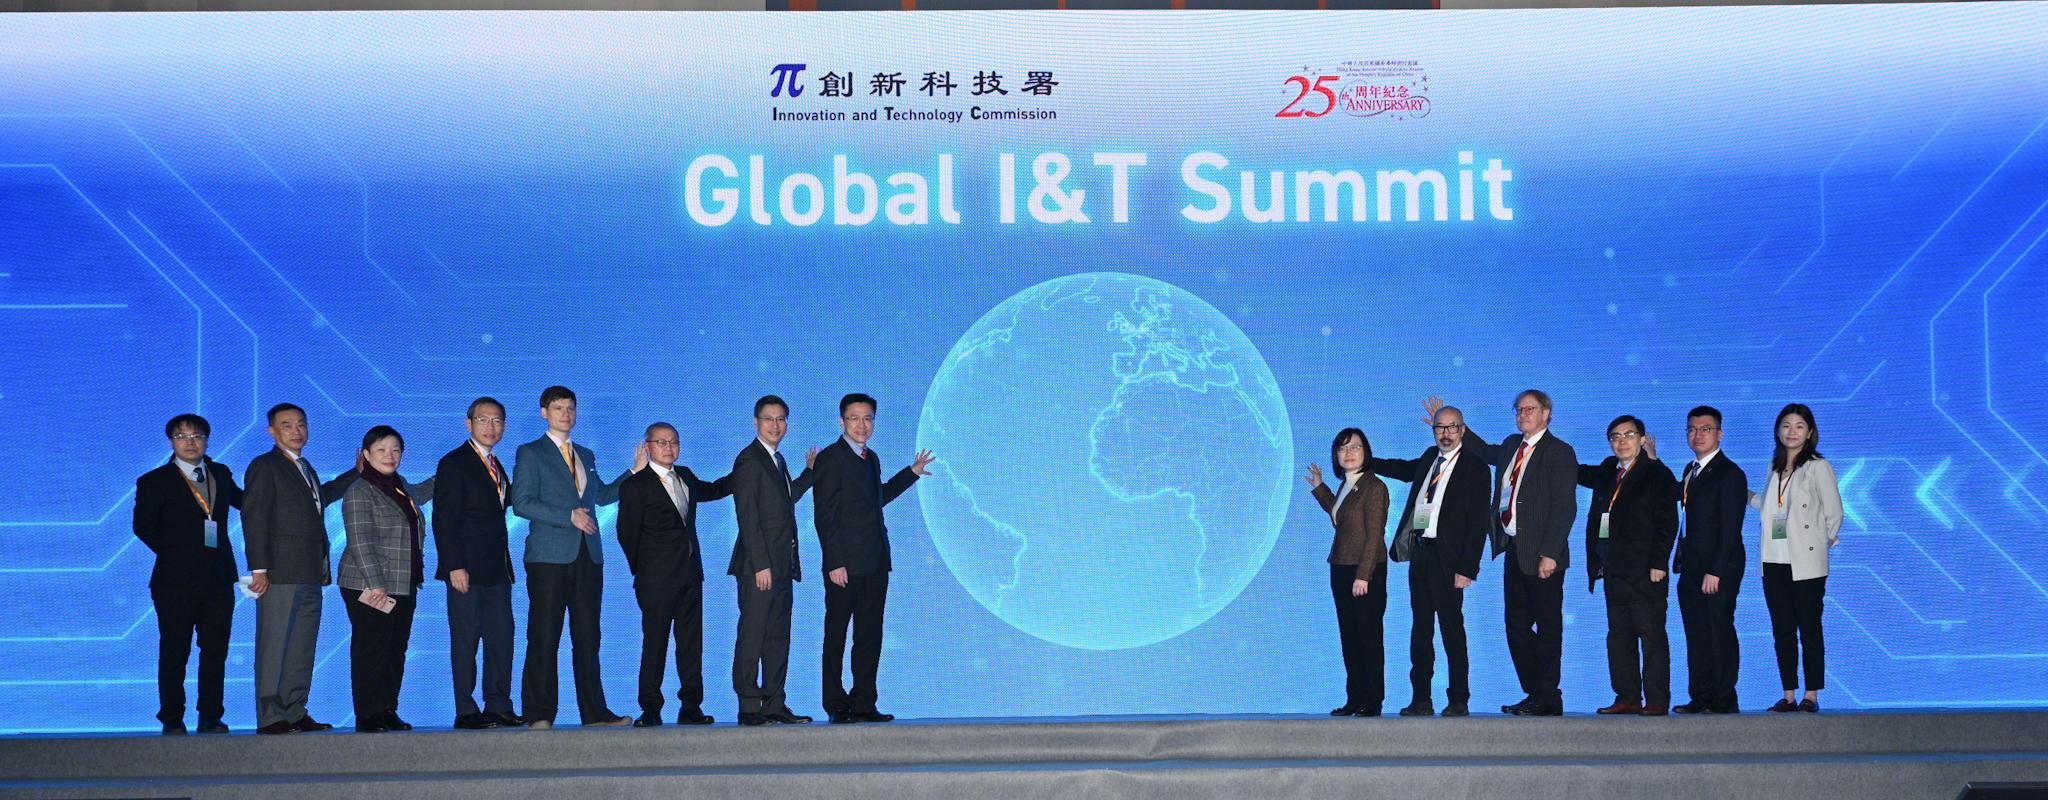 Organised by the Innovation and Technology Commission, the Global I&T Summit was concluded with great success today (December 15). Photo shows the Secretary for Innovation, Technology and Industry, Professor Sun Dong (eighth left), with the Permanent Secretary for Innovation, Technology and Industry, Mr Eddie Mak (seventh left); the Commissioner for Innovation and Technology, Ms Rebecca Pun (sixth right); and other guests officiating at the opening ceremony of the summit.